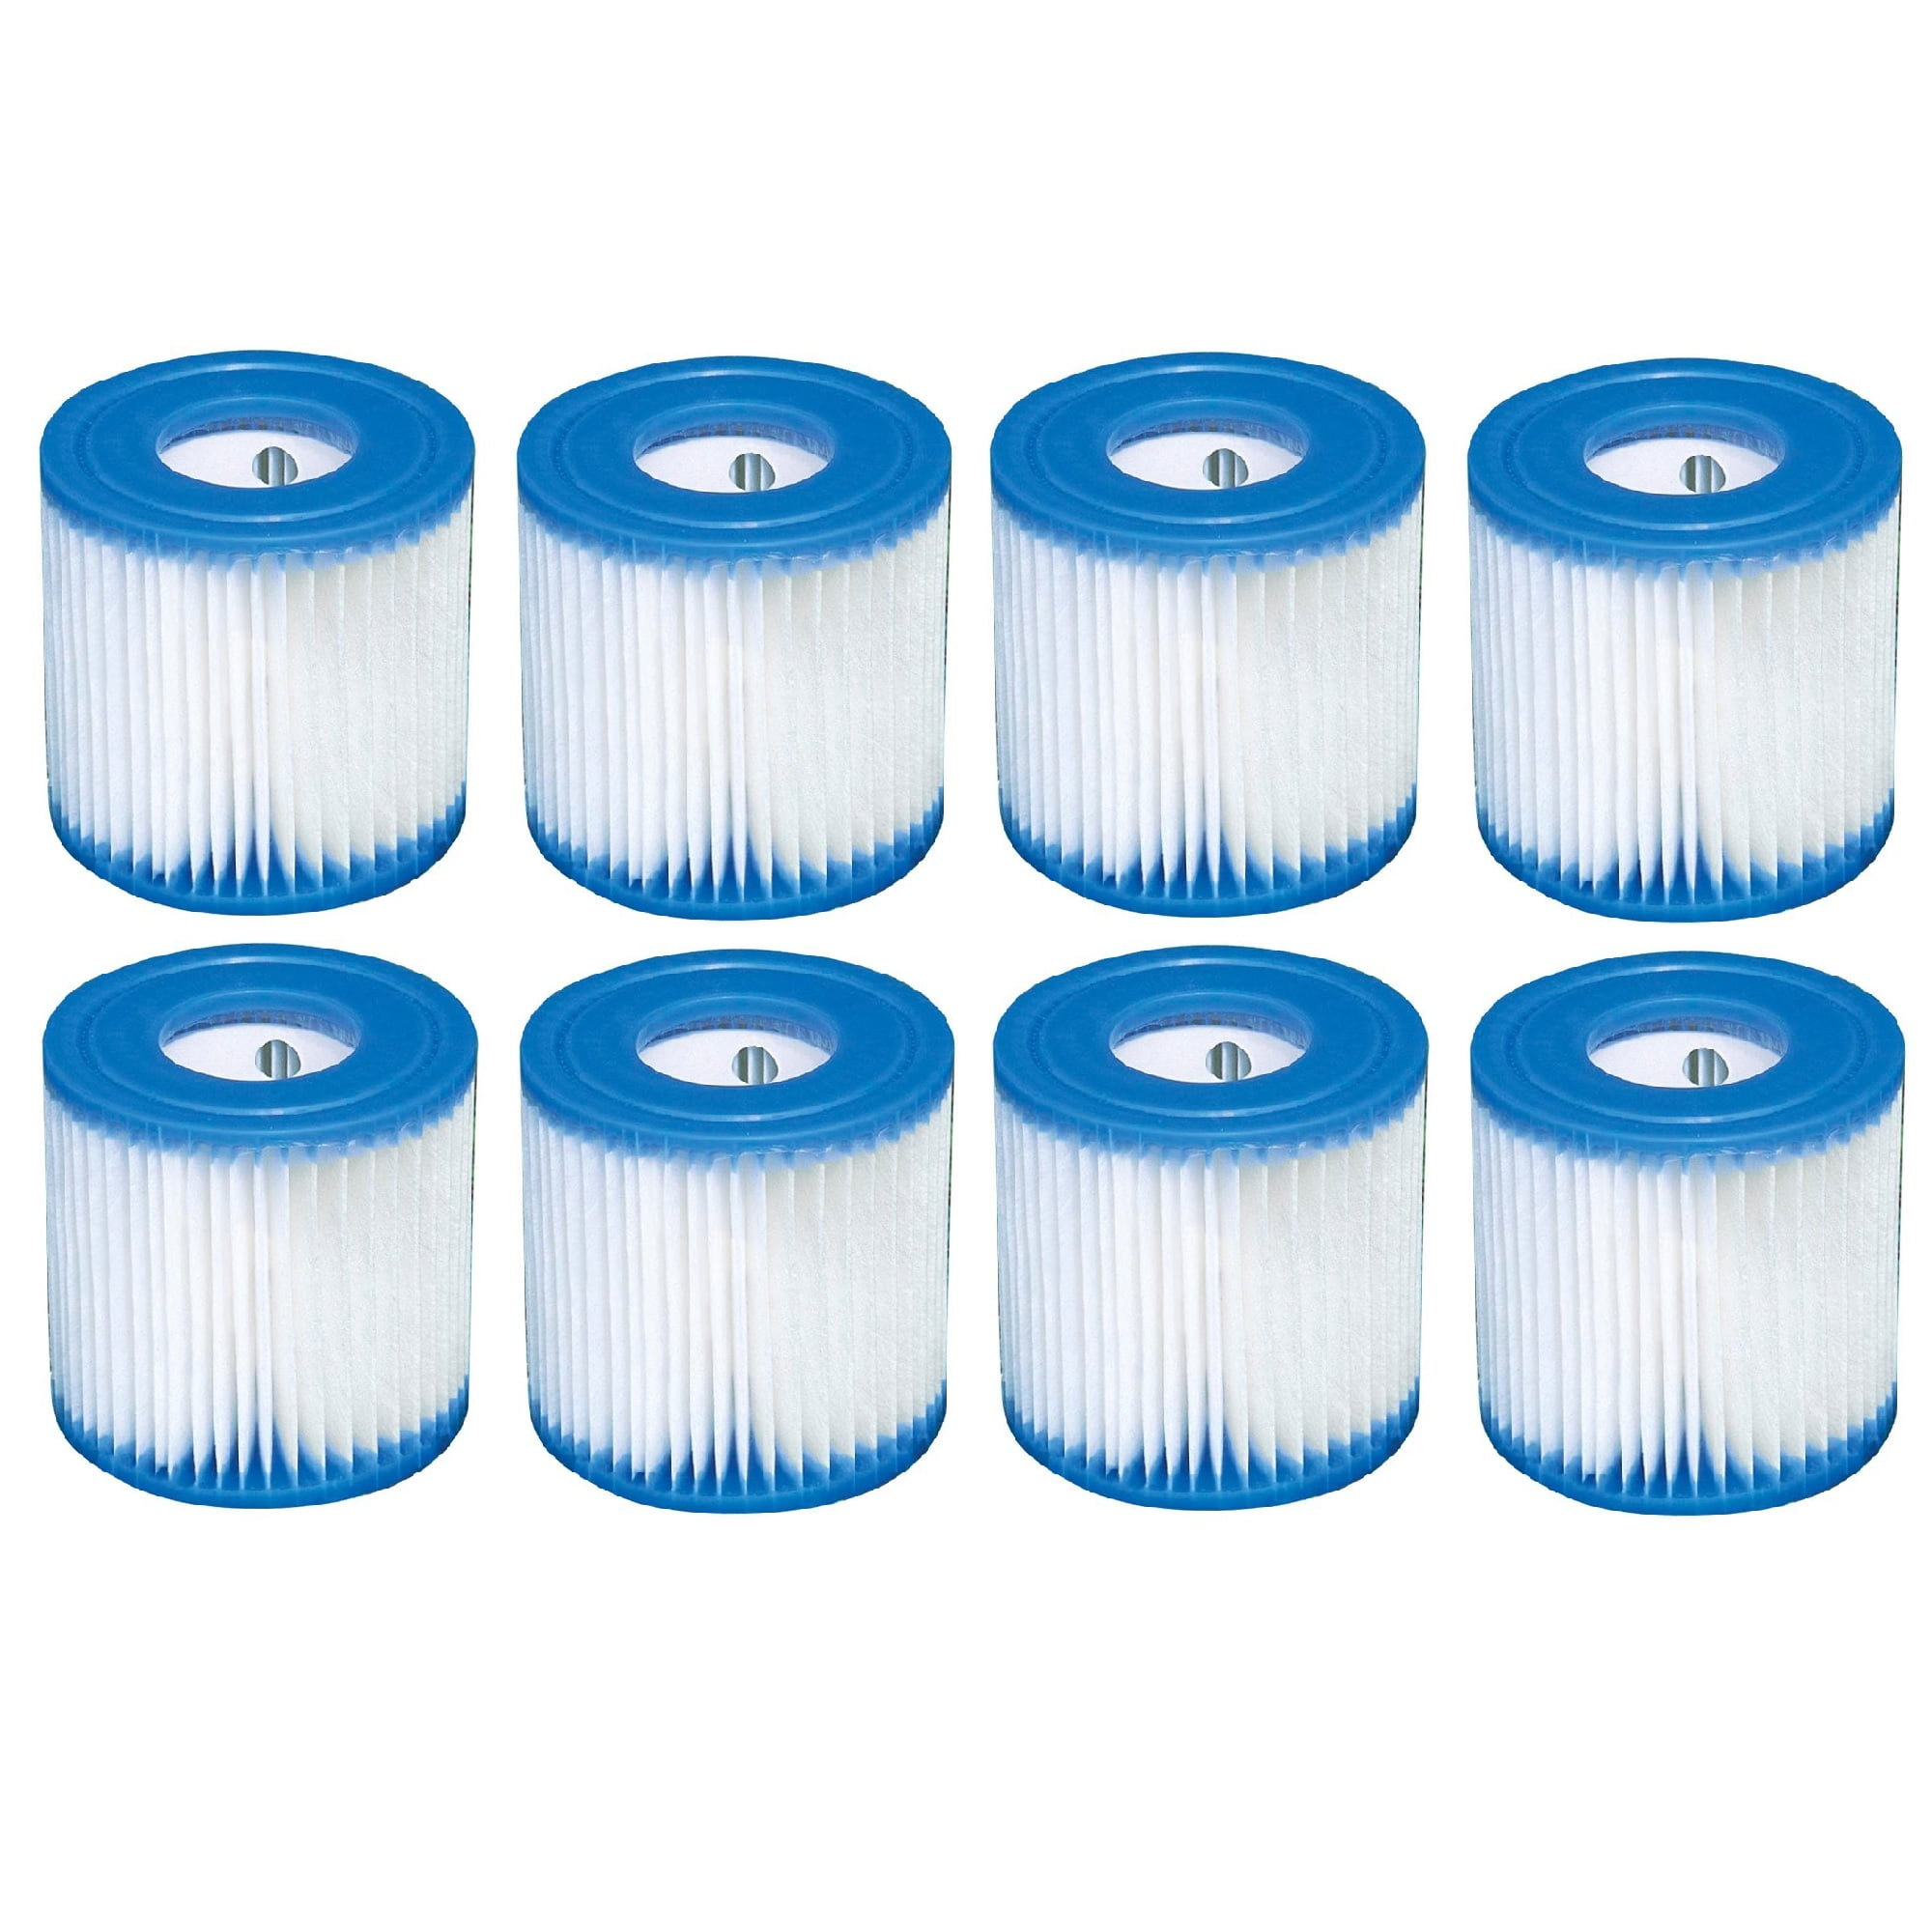 4pcs For Intex Type H Filter Cartridge For Above Ground Swimming Pools Cleaning 